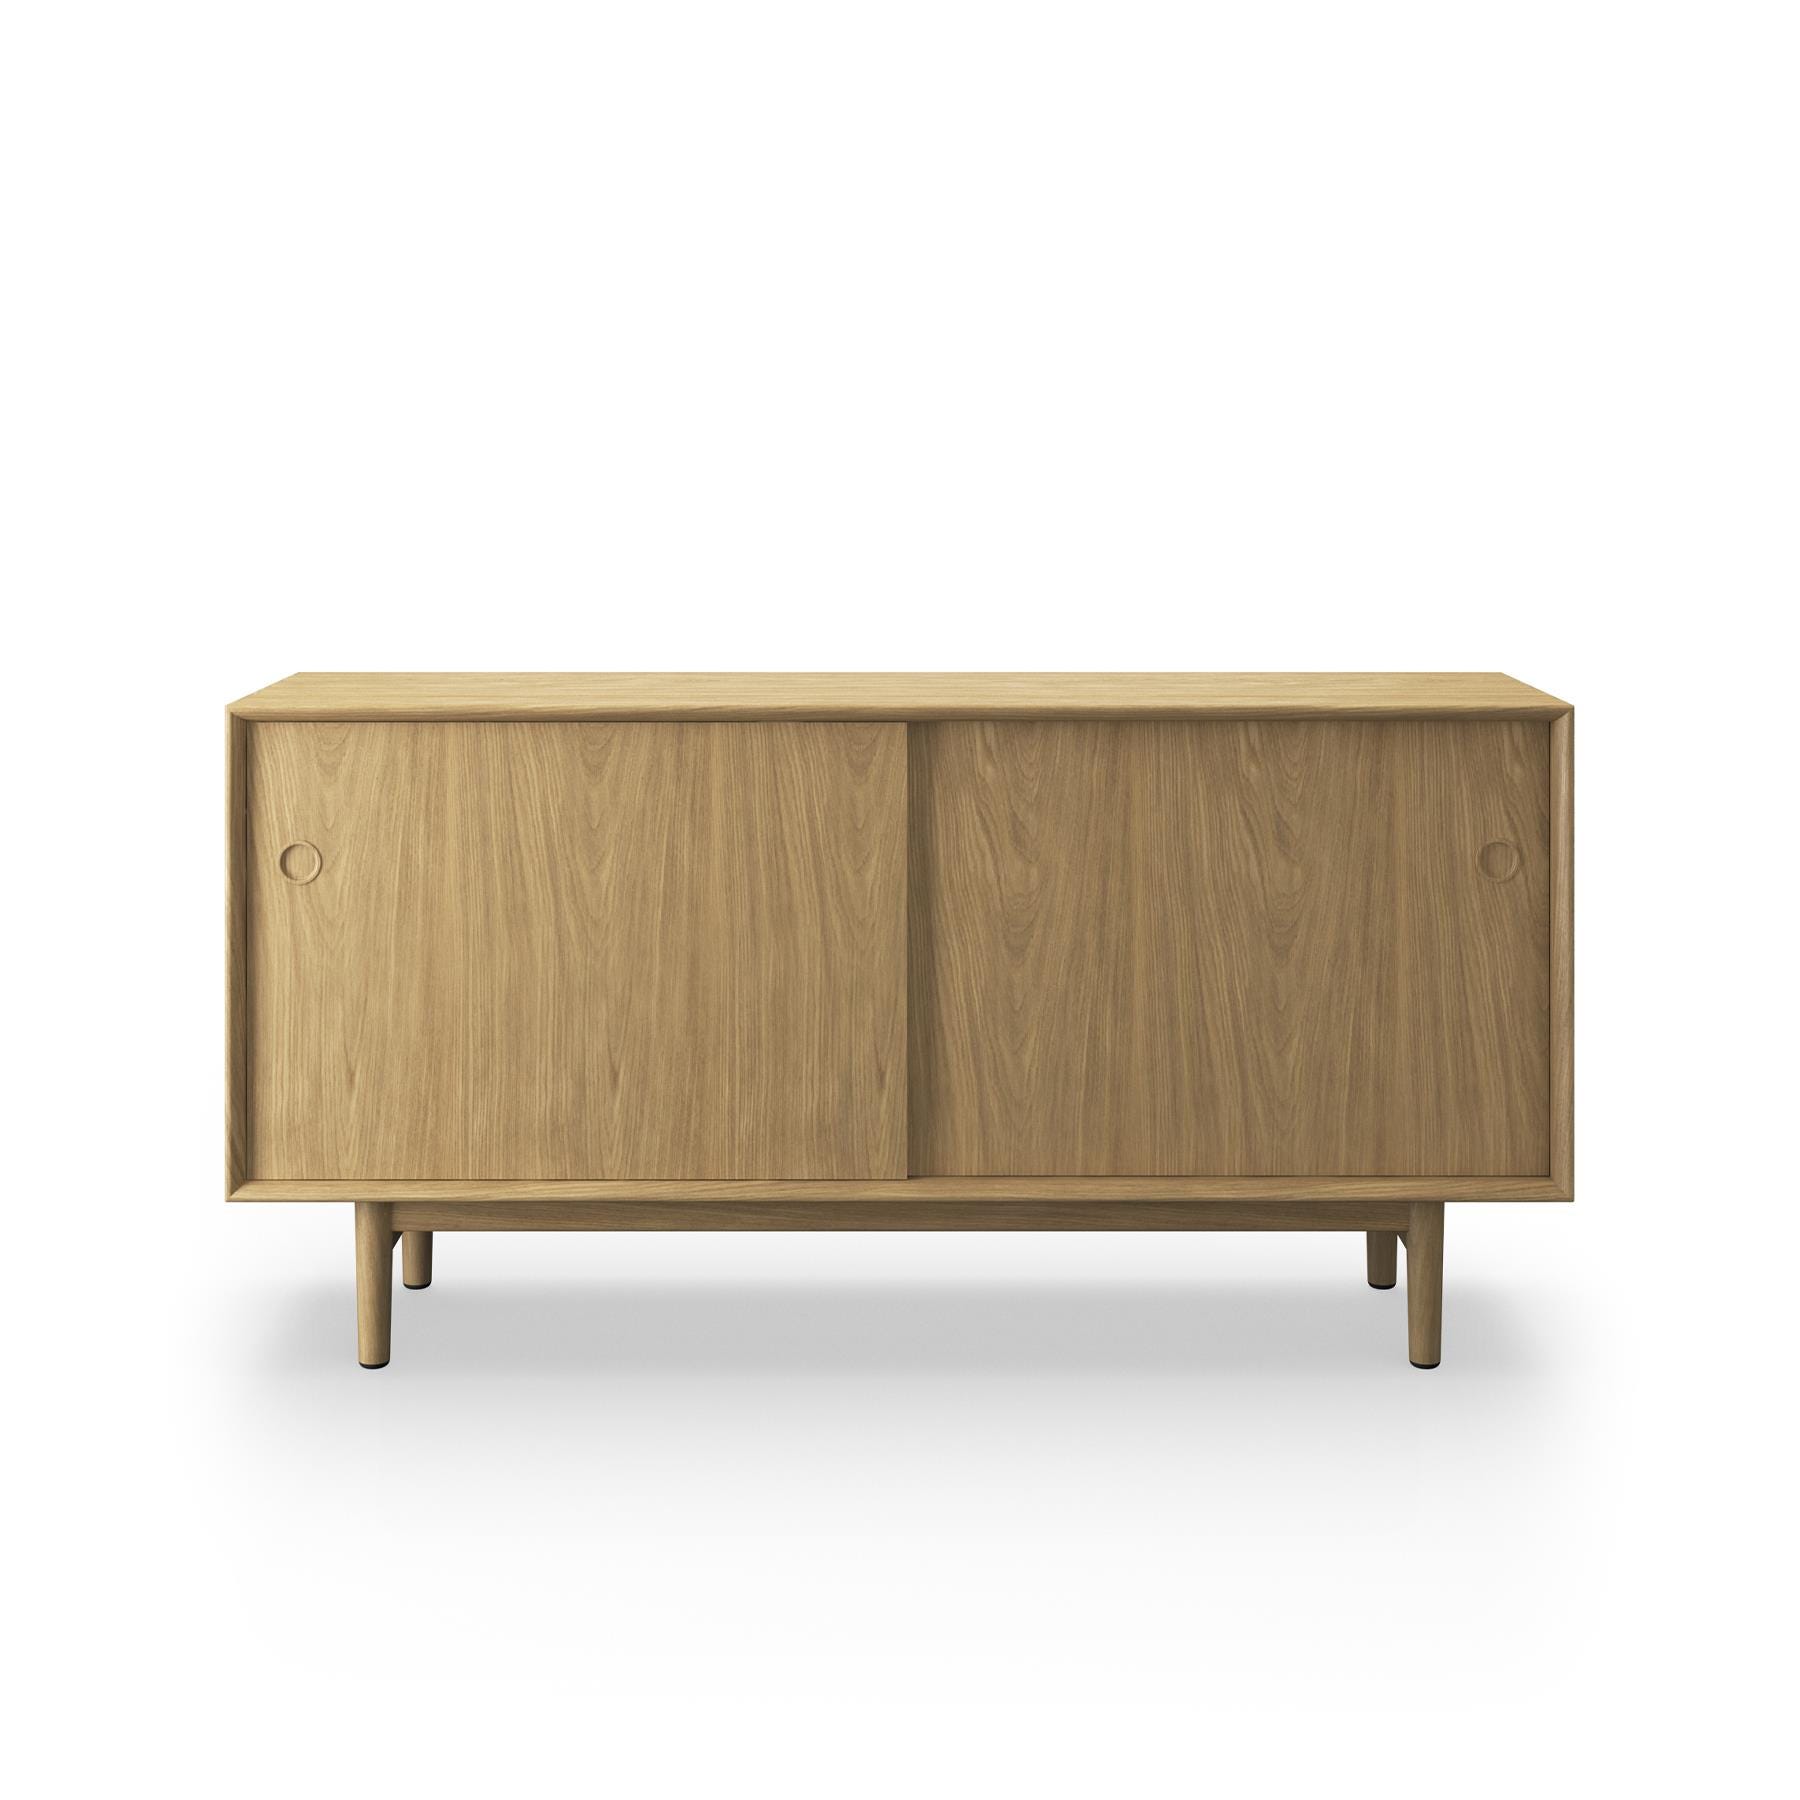 Sibast No 11 Sideboard White Oiled Oak Natural Front Wooden Legs Light Wood Designer Furniture From Holloways Of Ludlow